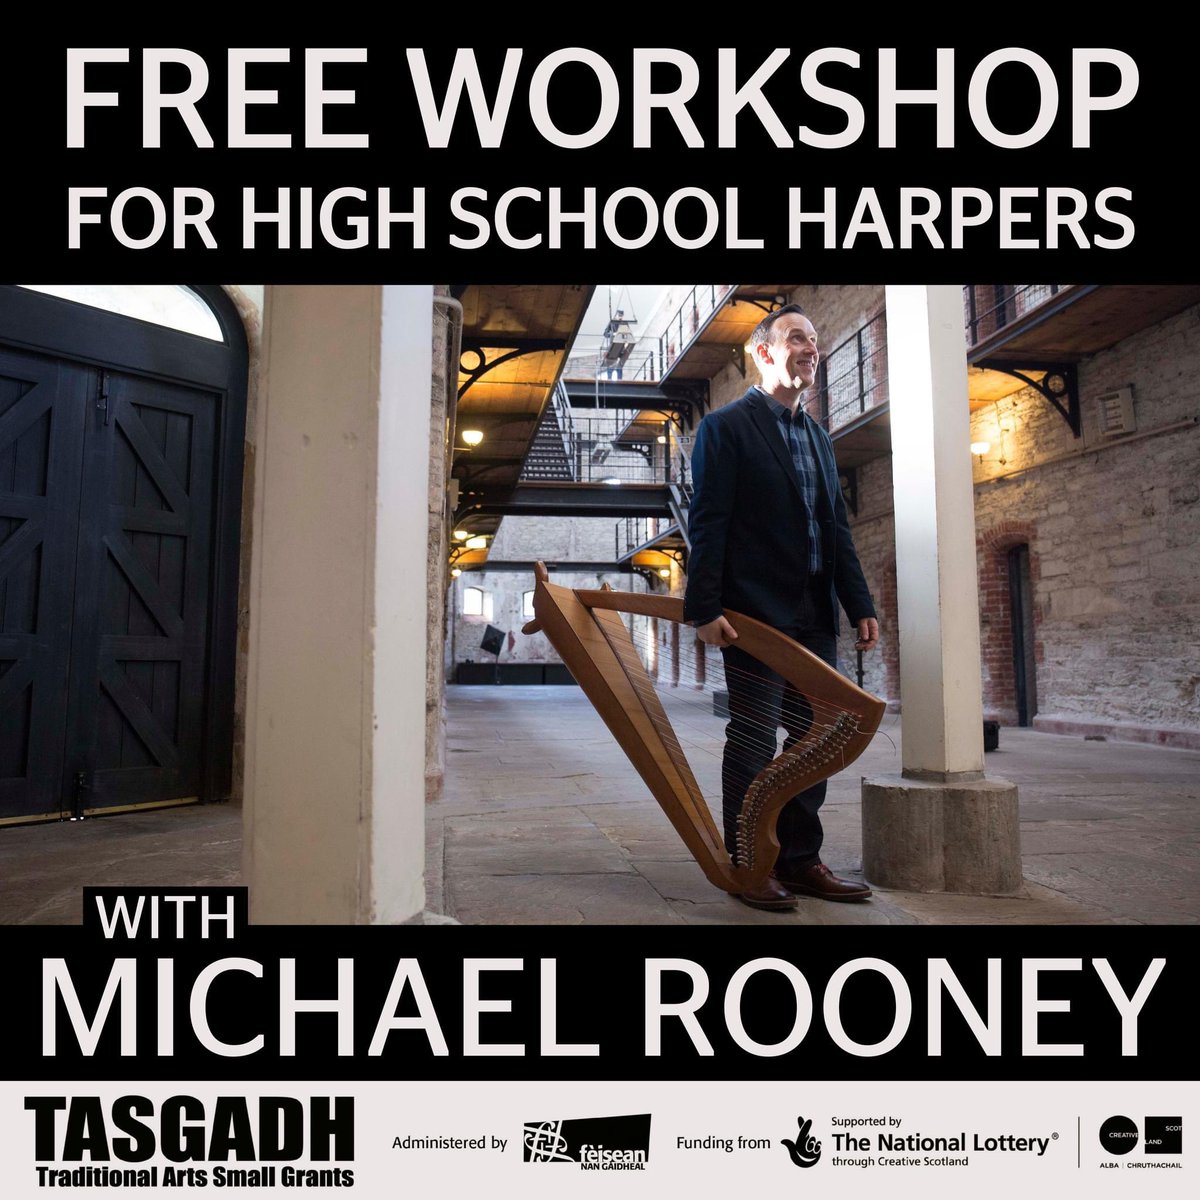 NEW! FREE harp workshop for High School aged harpers with Ireland’s Michael Rooney 👉 Sat 8th April 4.30pm, George Watson’s College, Edinburgh 👉 Intemediate/advanced level Small grants available to aid travel costs. BOOK NOW AS PLACES LIMITED! harpfestival.co.uk/event/youth-ou…